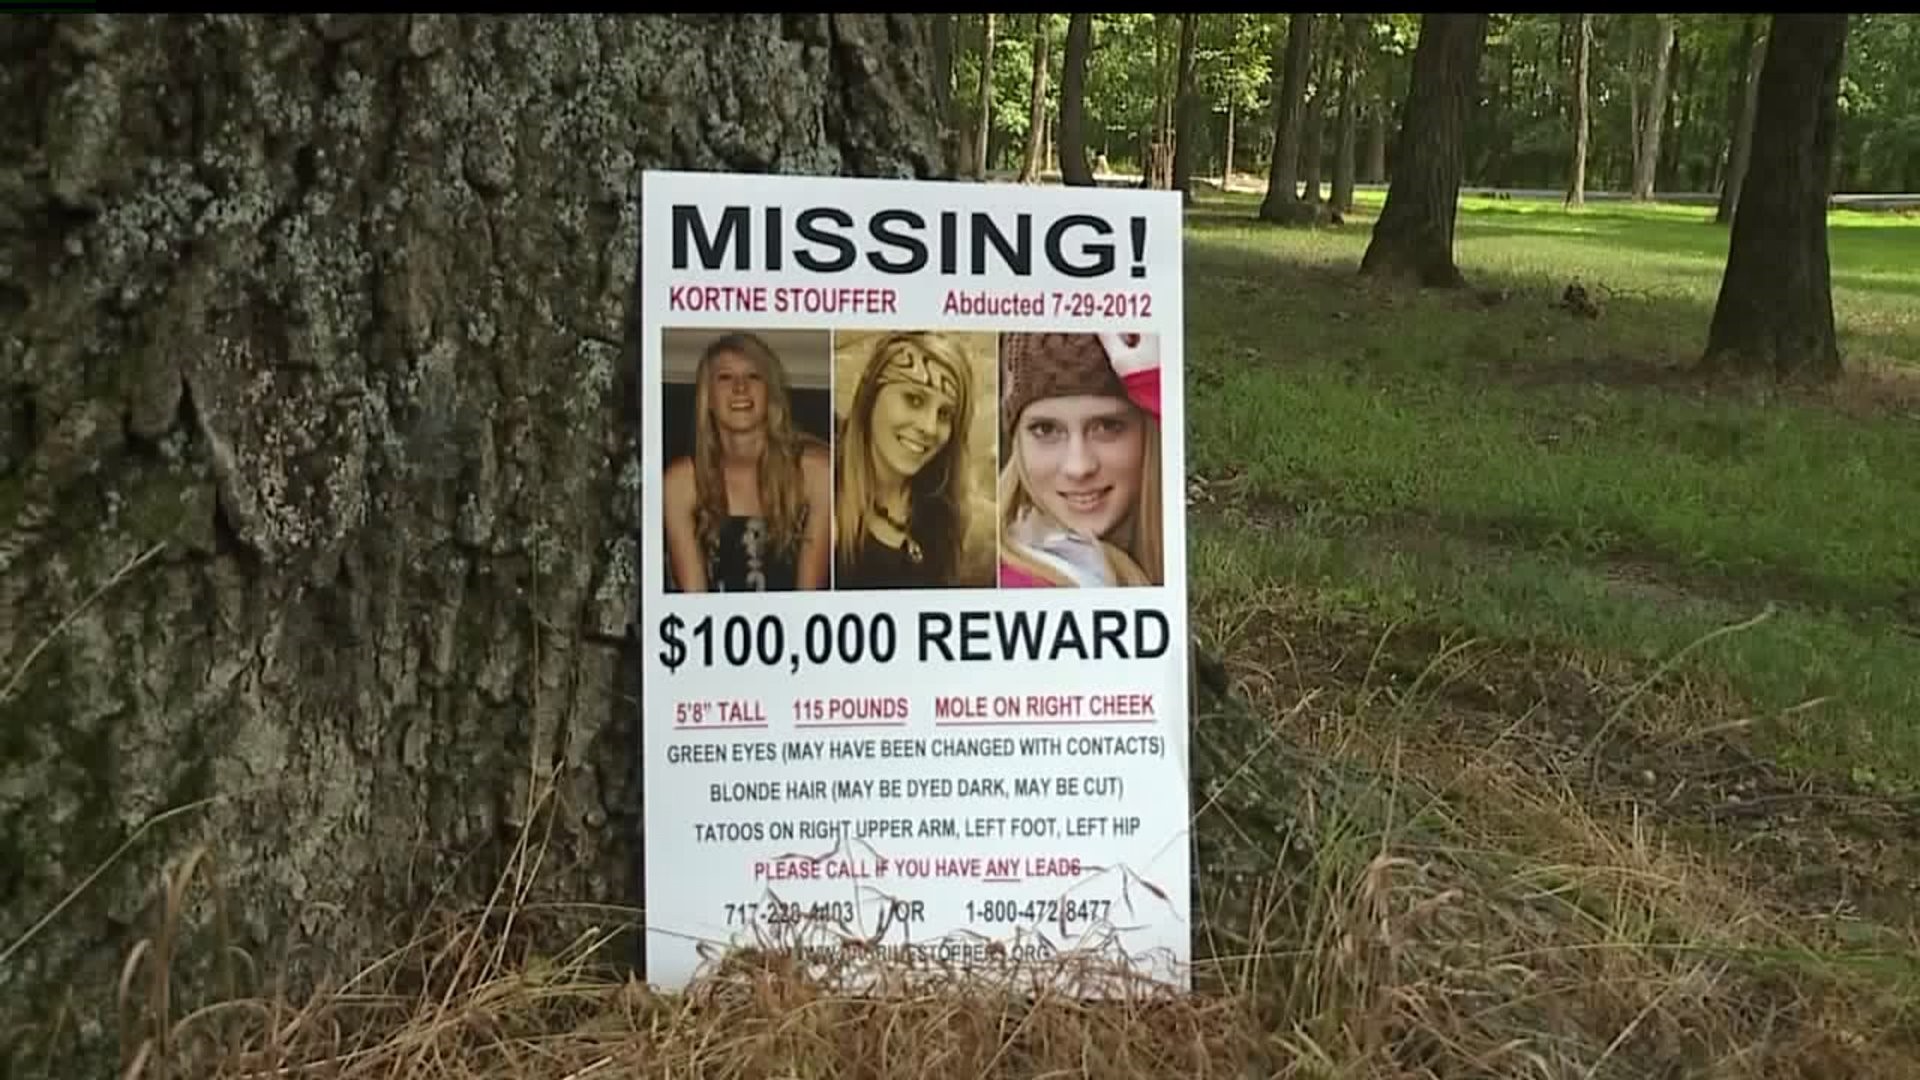 7 years since Kortne Stouffer disappeared